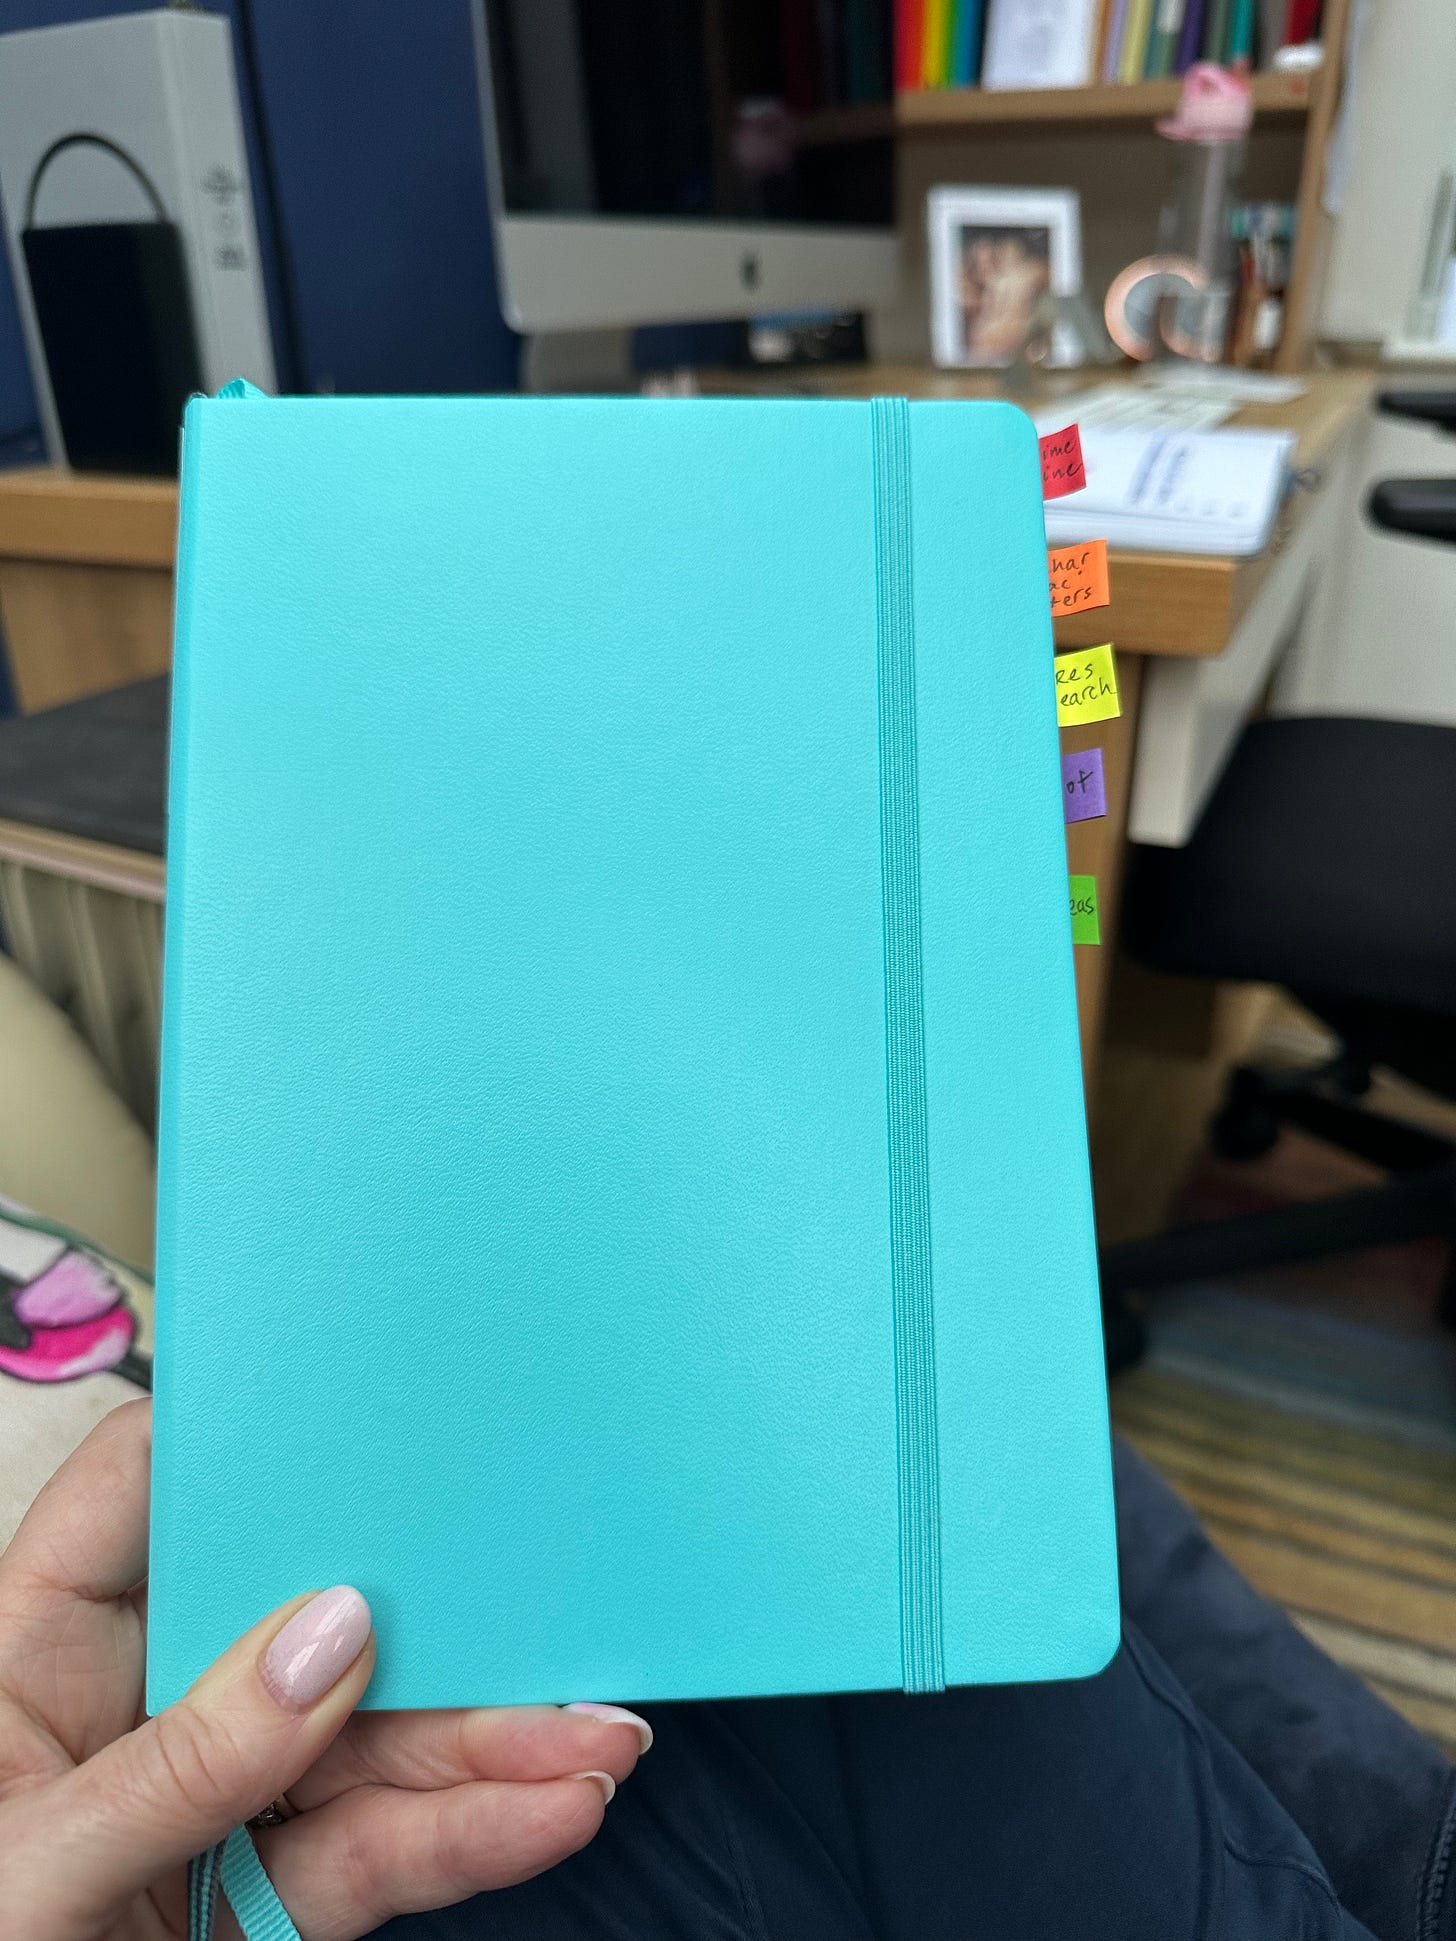 Image shows a hand holding a turquoise notebook.